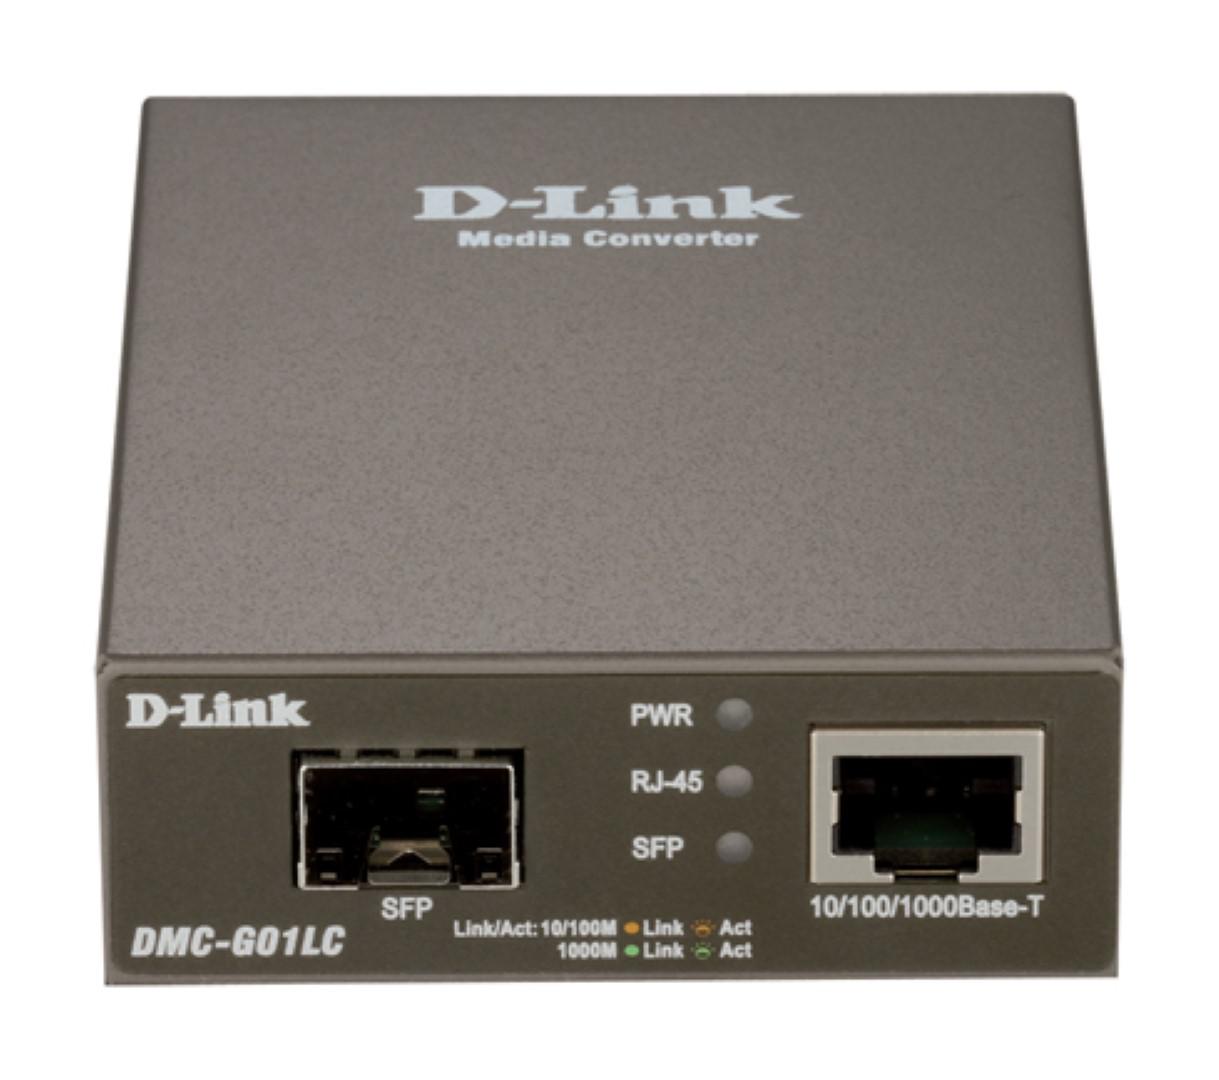 D-link DMC G01LC 1000BaseT to SFP Standalone Media Converter, 1 x 10/100/1000 Mbps port, IEEE 802.3u/x/3ab, Auto-Negotiation, Auto MDI/MDIX, Max. Forwarding Rate 1,488,000 pps Switching Capacity: 2 Gbps.